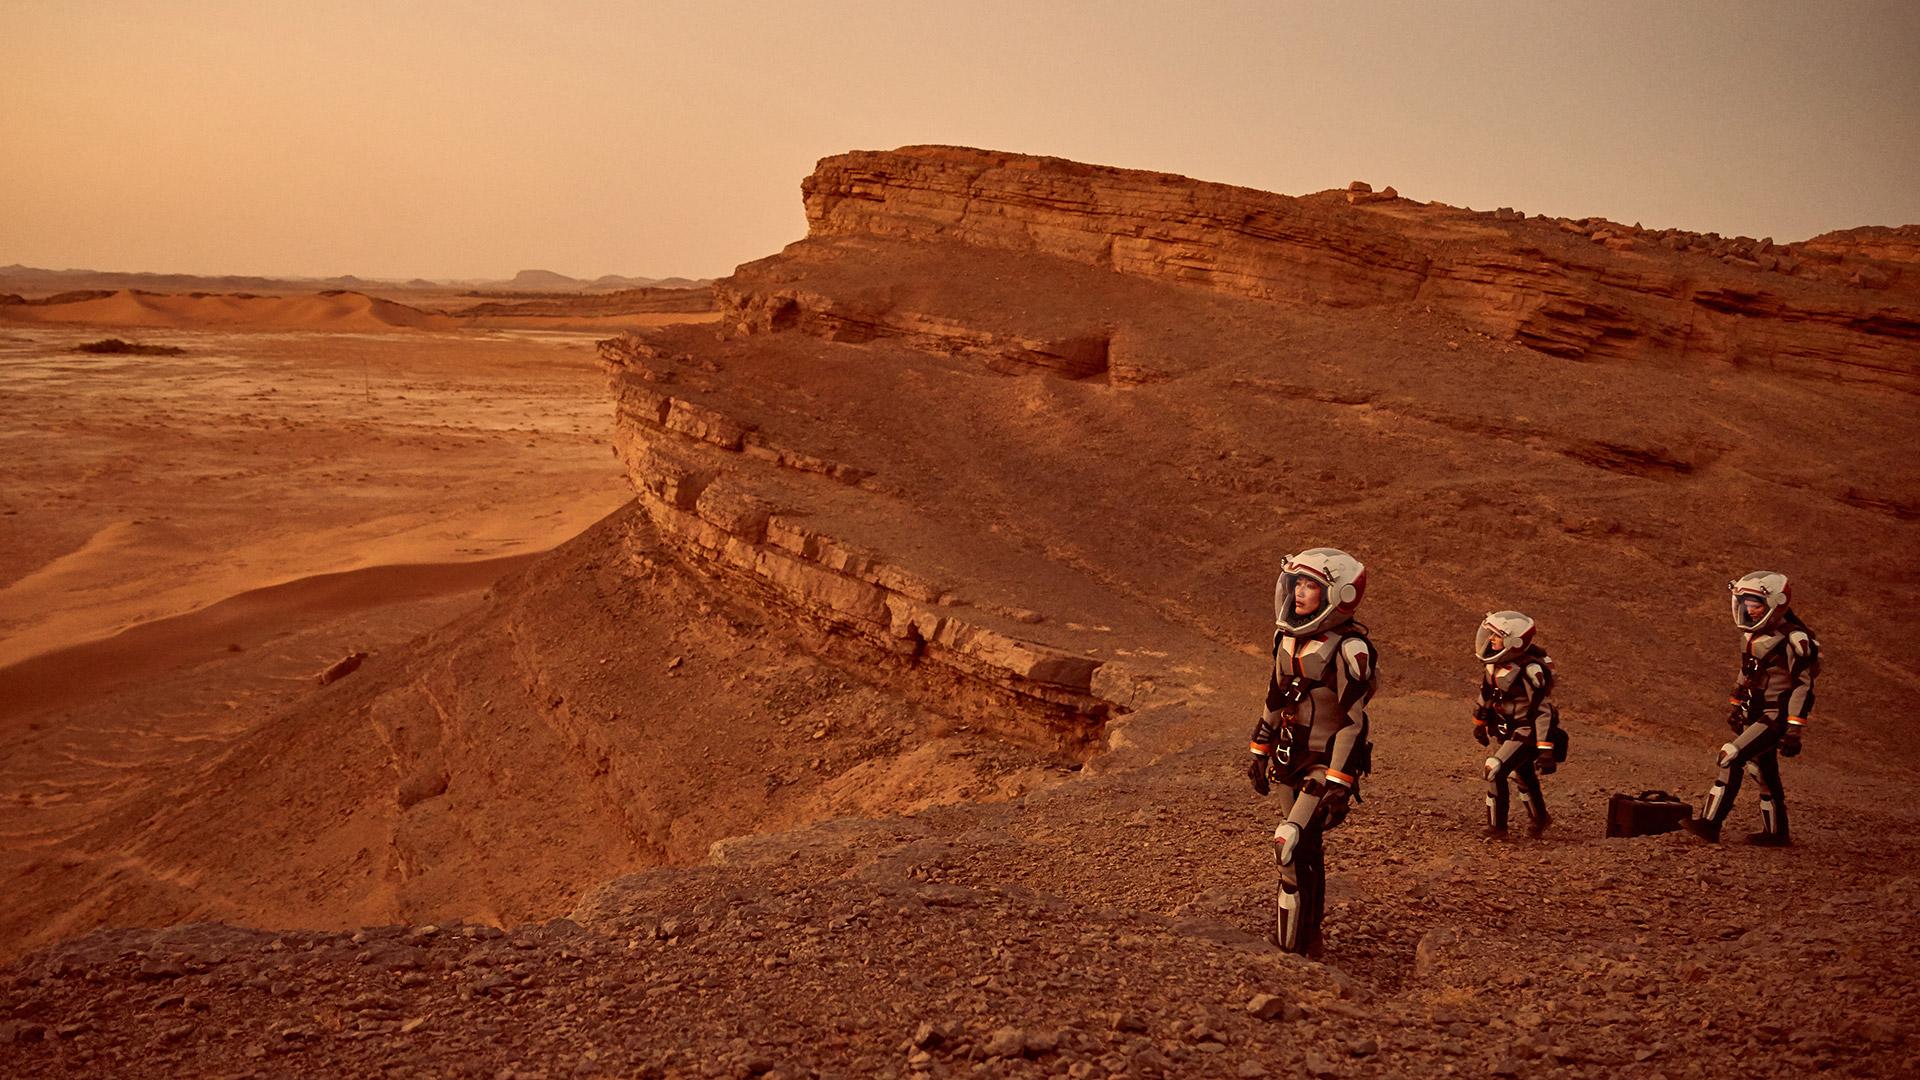 Life on Mars: A look at the sets of National Geographic Channel's